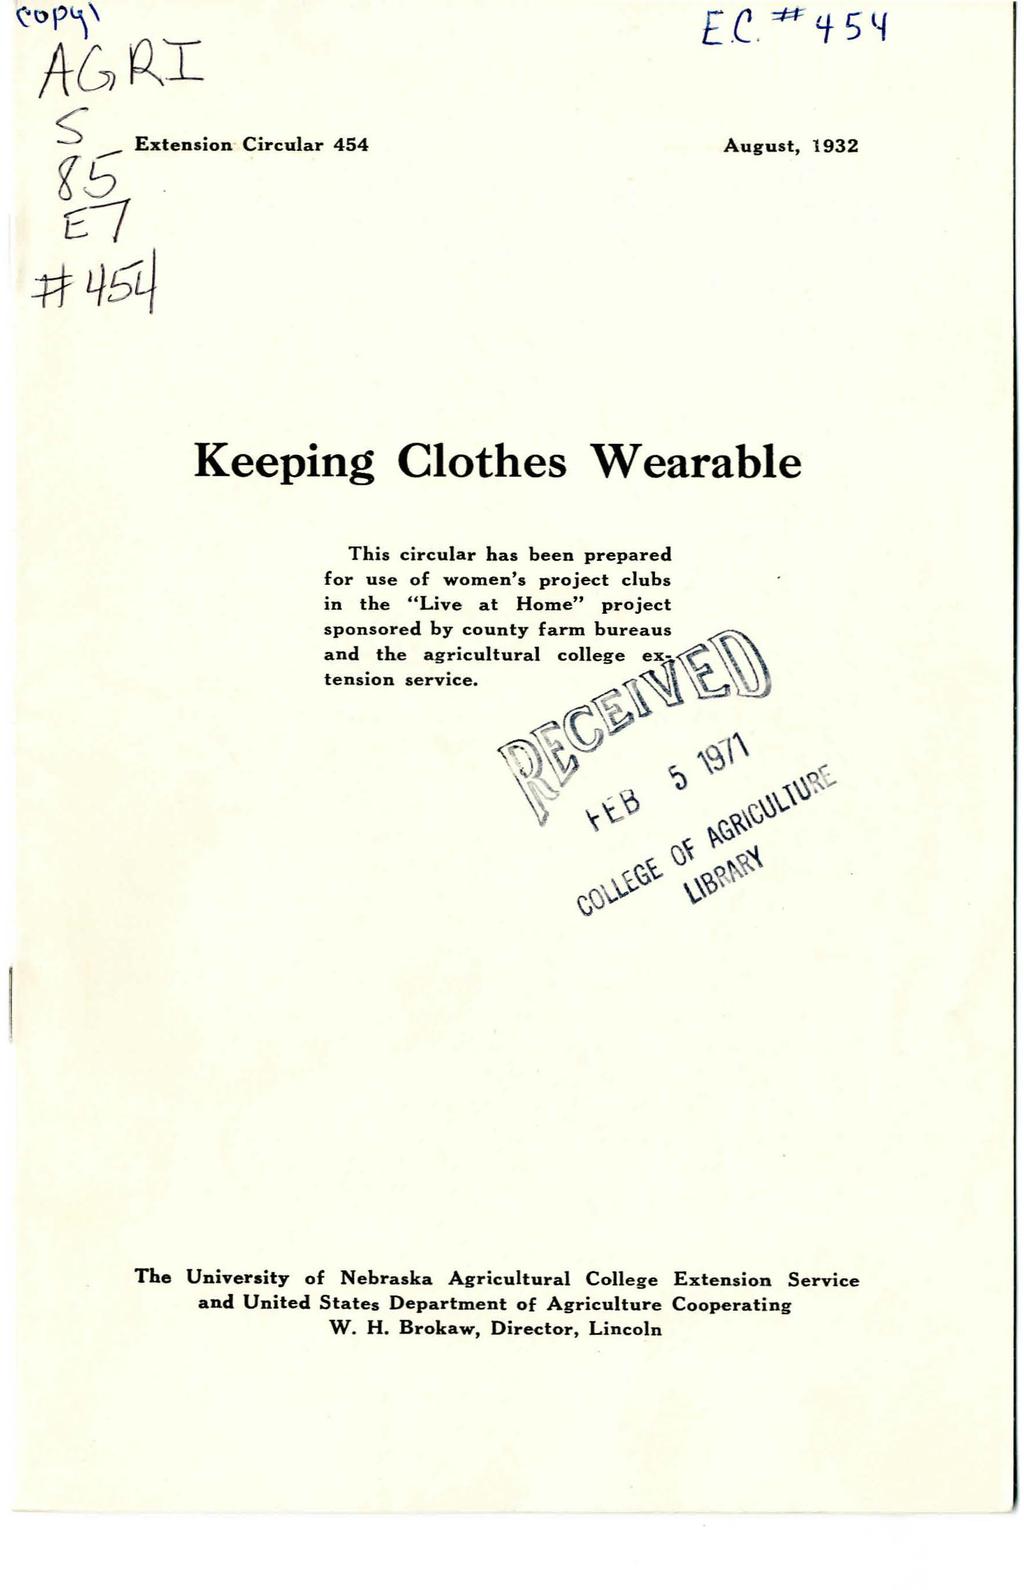 (' o p~ \ AG ~I ~ Extension Circular 454 fg / -# 46'4 August, 1932 Keeping Clothes Wearable This circular has been prepared for use of women's project clubs in the " Live at Home" project sponsored